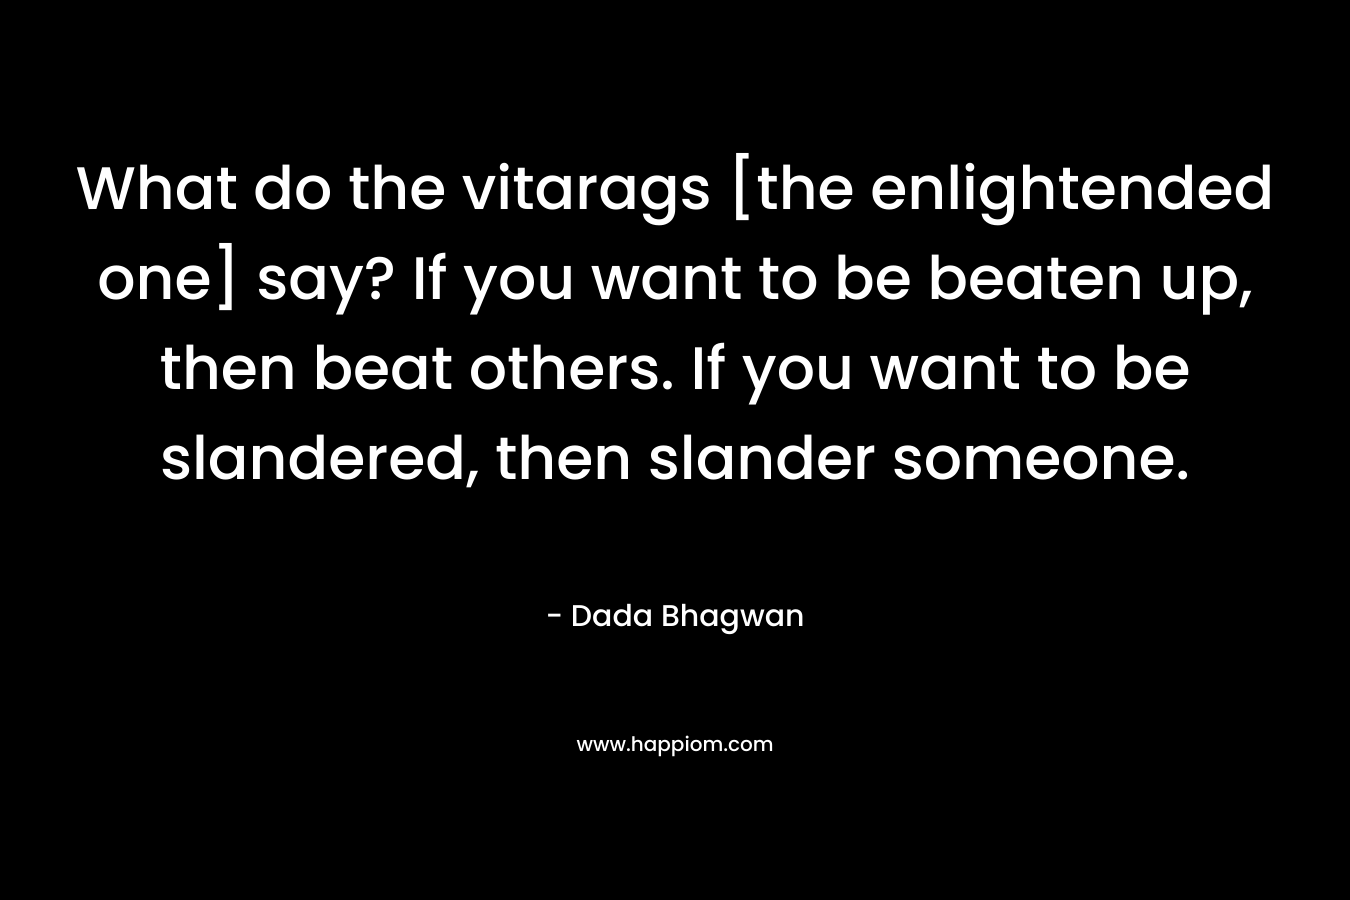 What do the vitarags [the enlightended one] say? If you want to be beaten up, then beat others. If you want to be slandered, then slander someone. – Dada Bhagwan